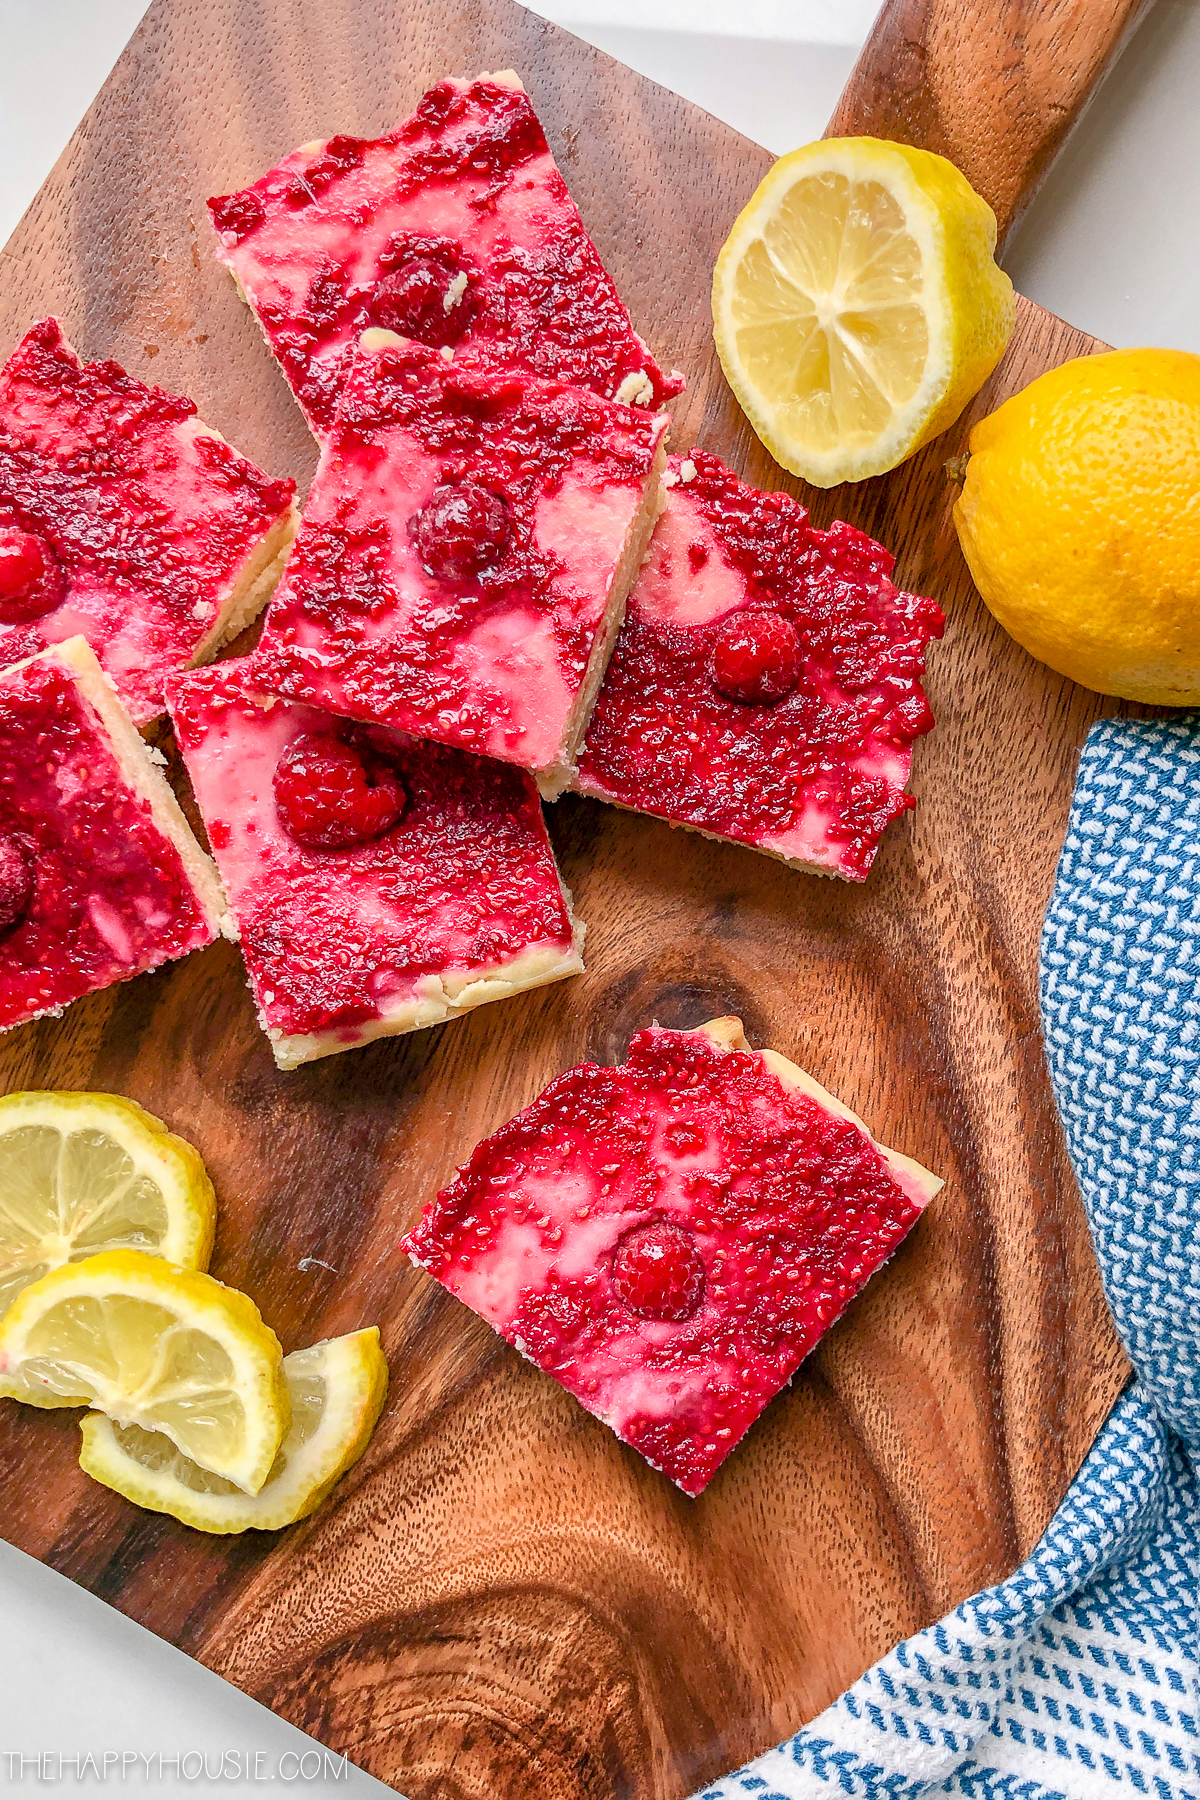 Raspberry bars and cut lemons on the wooden cutting board.